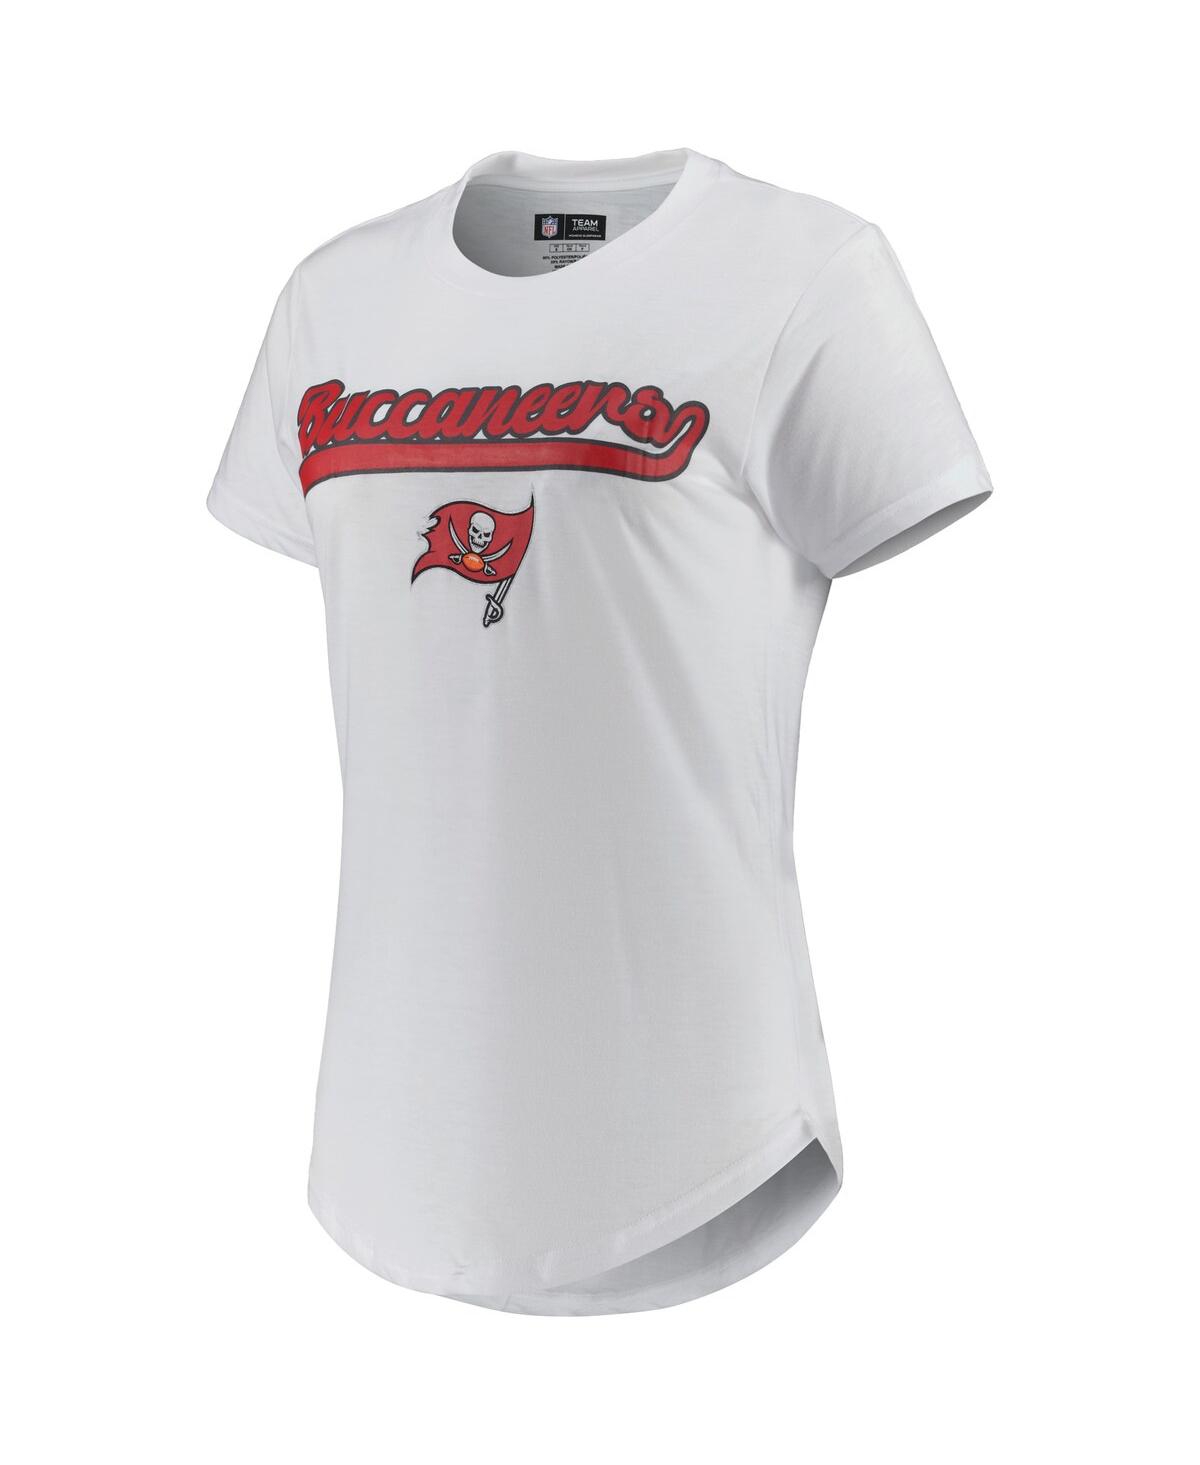 Shop Concepts Sport Women's  White, Charcoal Tampa Bay Buccaneers Sonata T-shirt And Leggings Sleep Set In White,charcoal